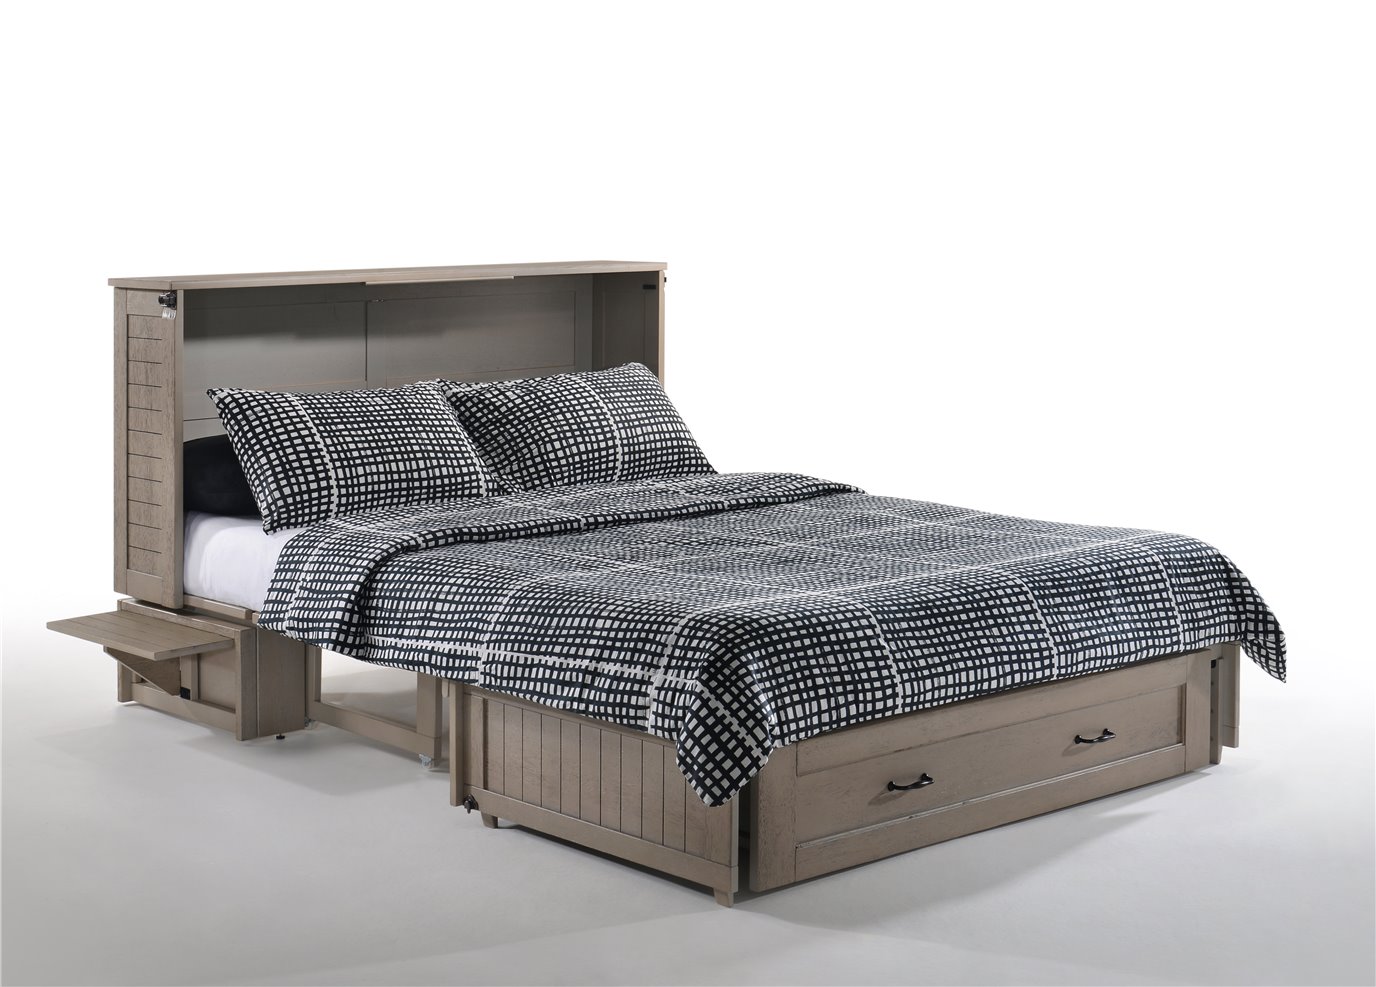 Poppy Murphy Cabinet Bed in Brushed Driftwood Finish with Queen Mattress